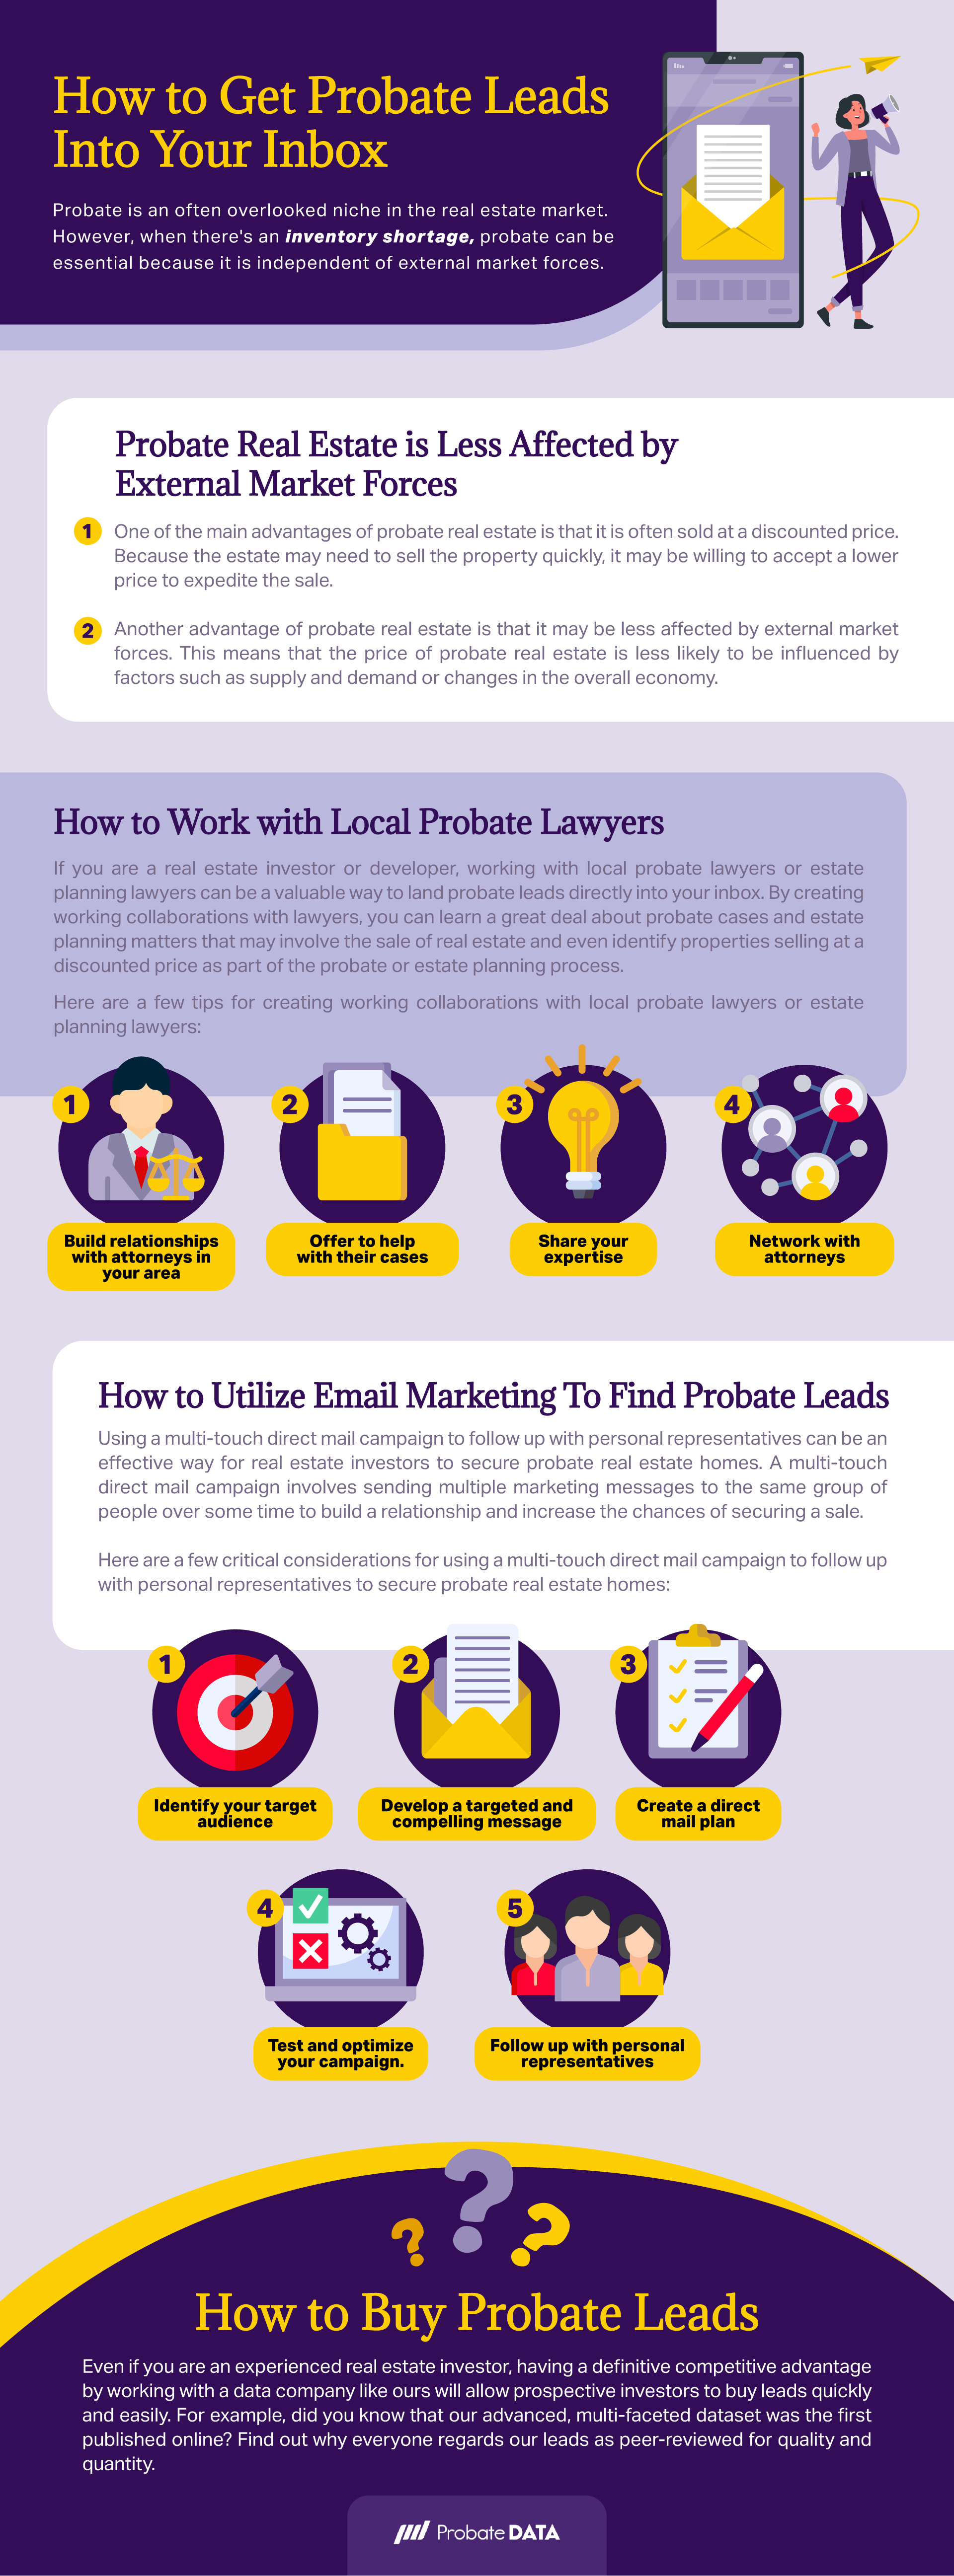 How to Get Probate Leads into Your Inbox Infographic FINAL